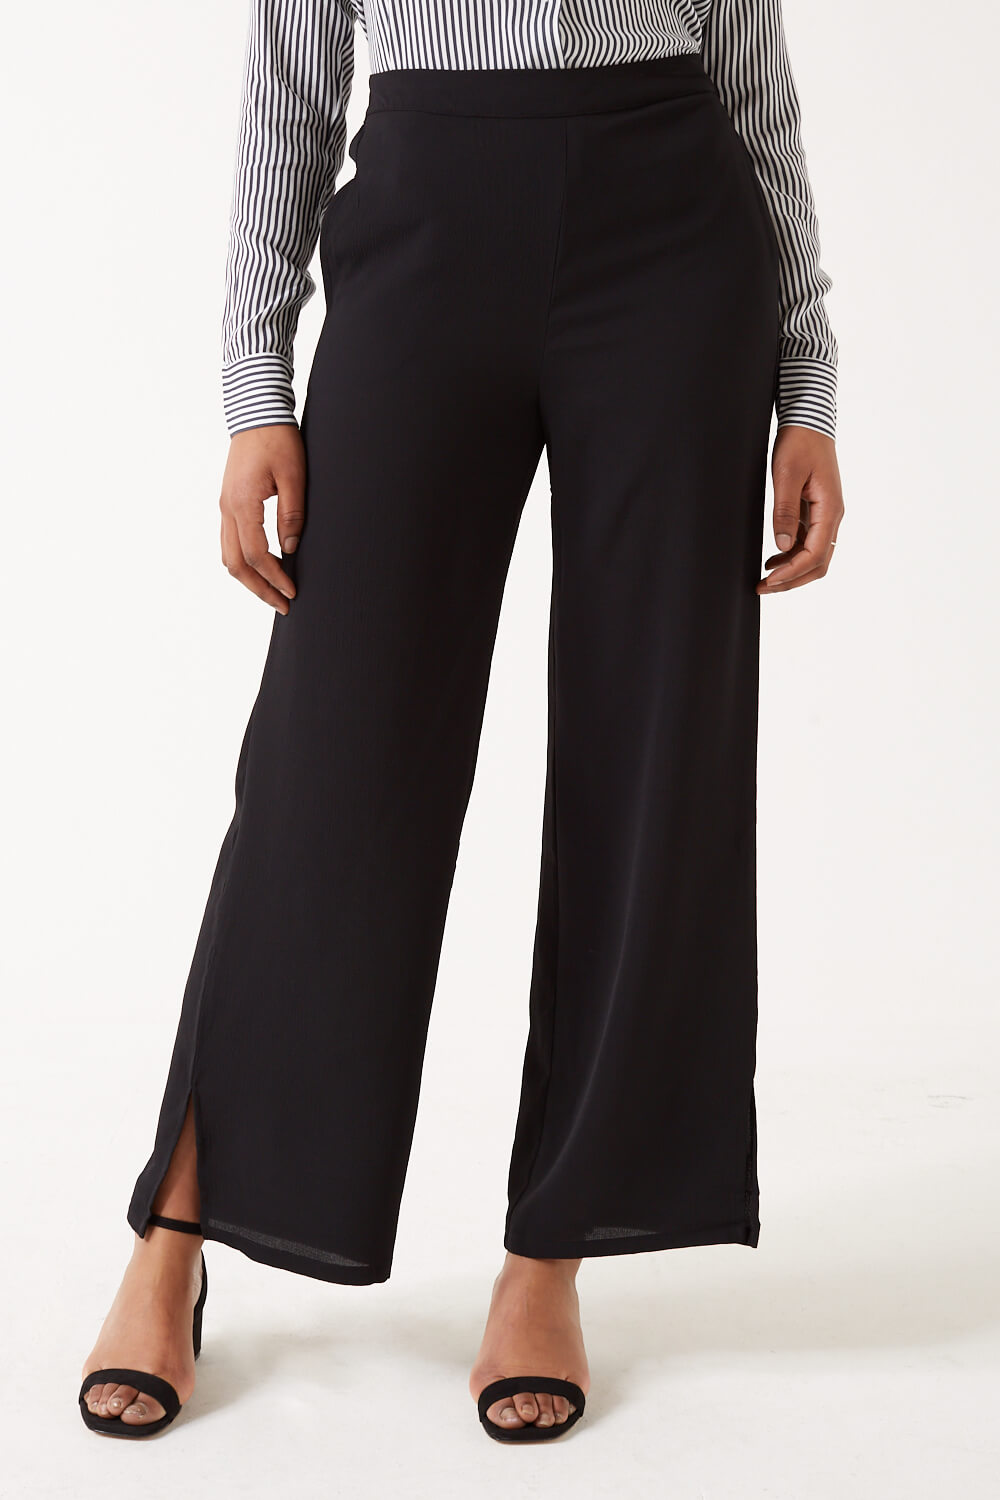 Only Nova Wide Leg Trousers in Black | iCLOTHING - iCLOTHING